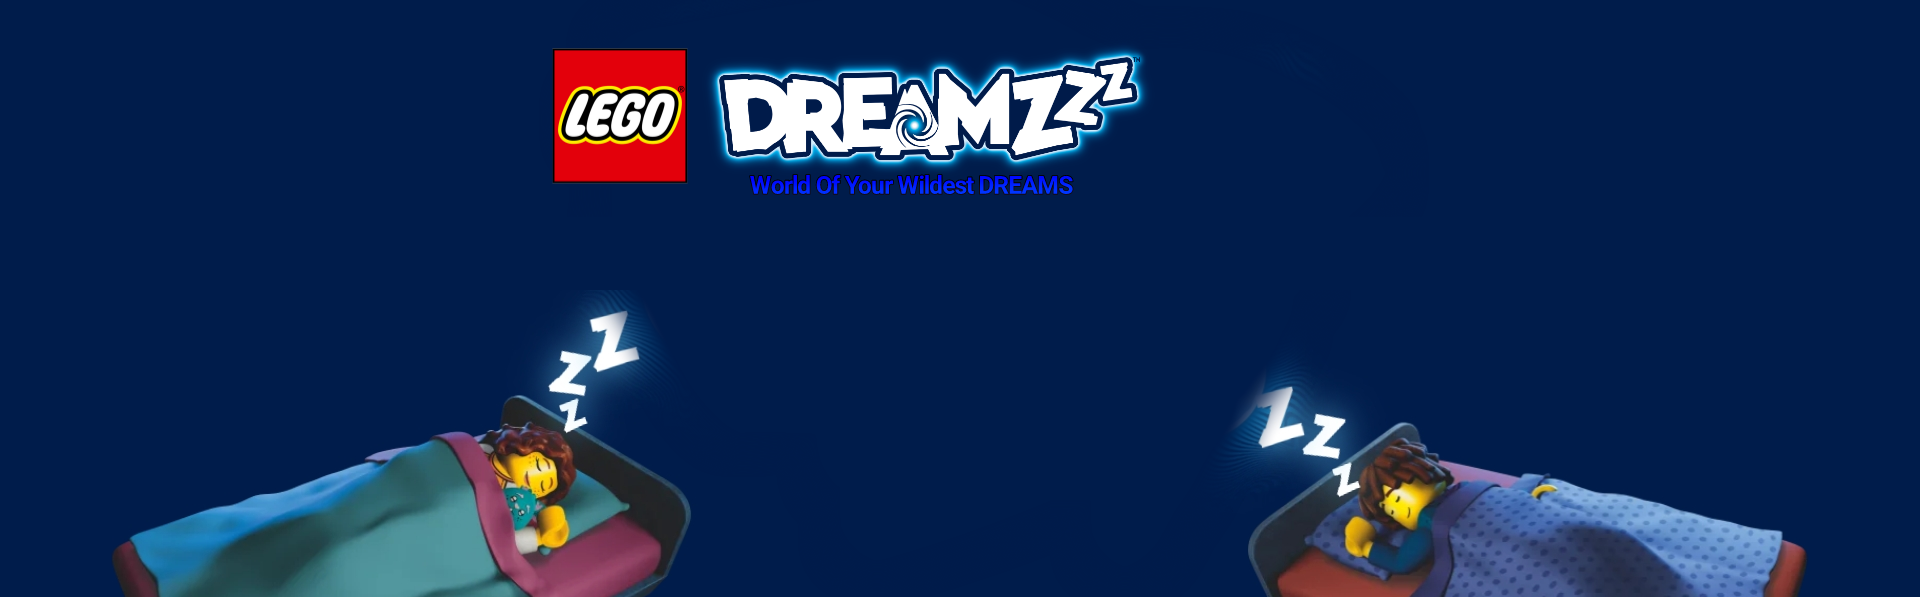 LEGO Dreamzz: World Of Your Wildest Dreams